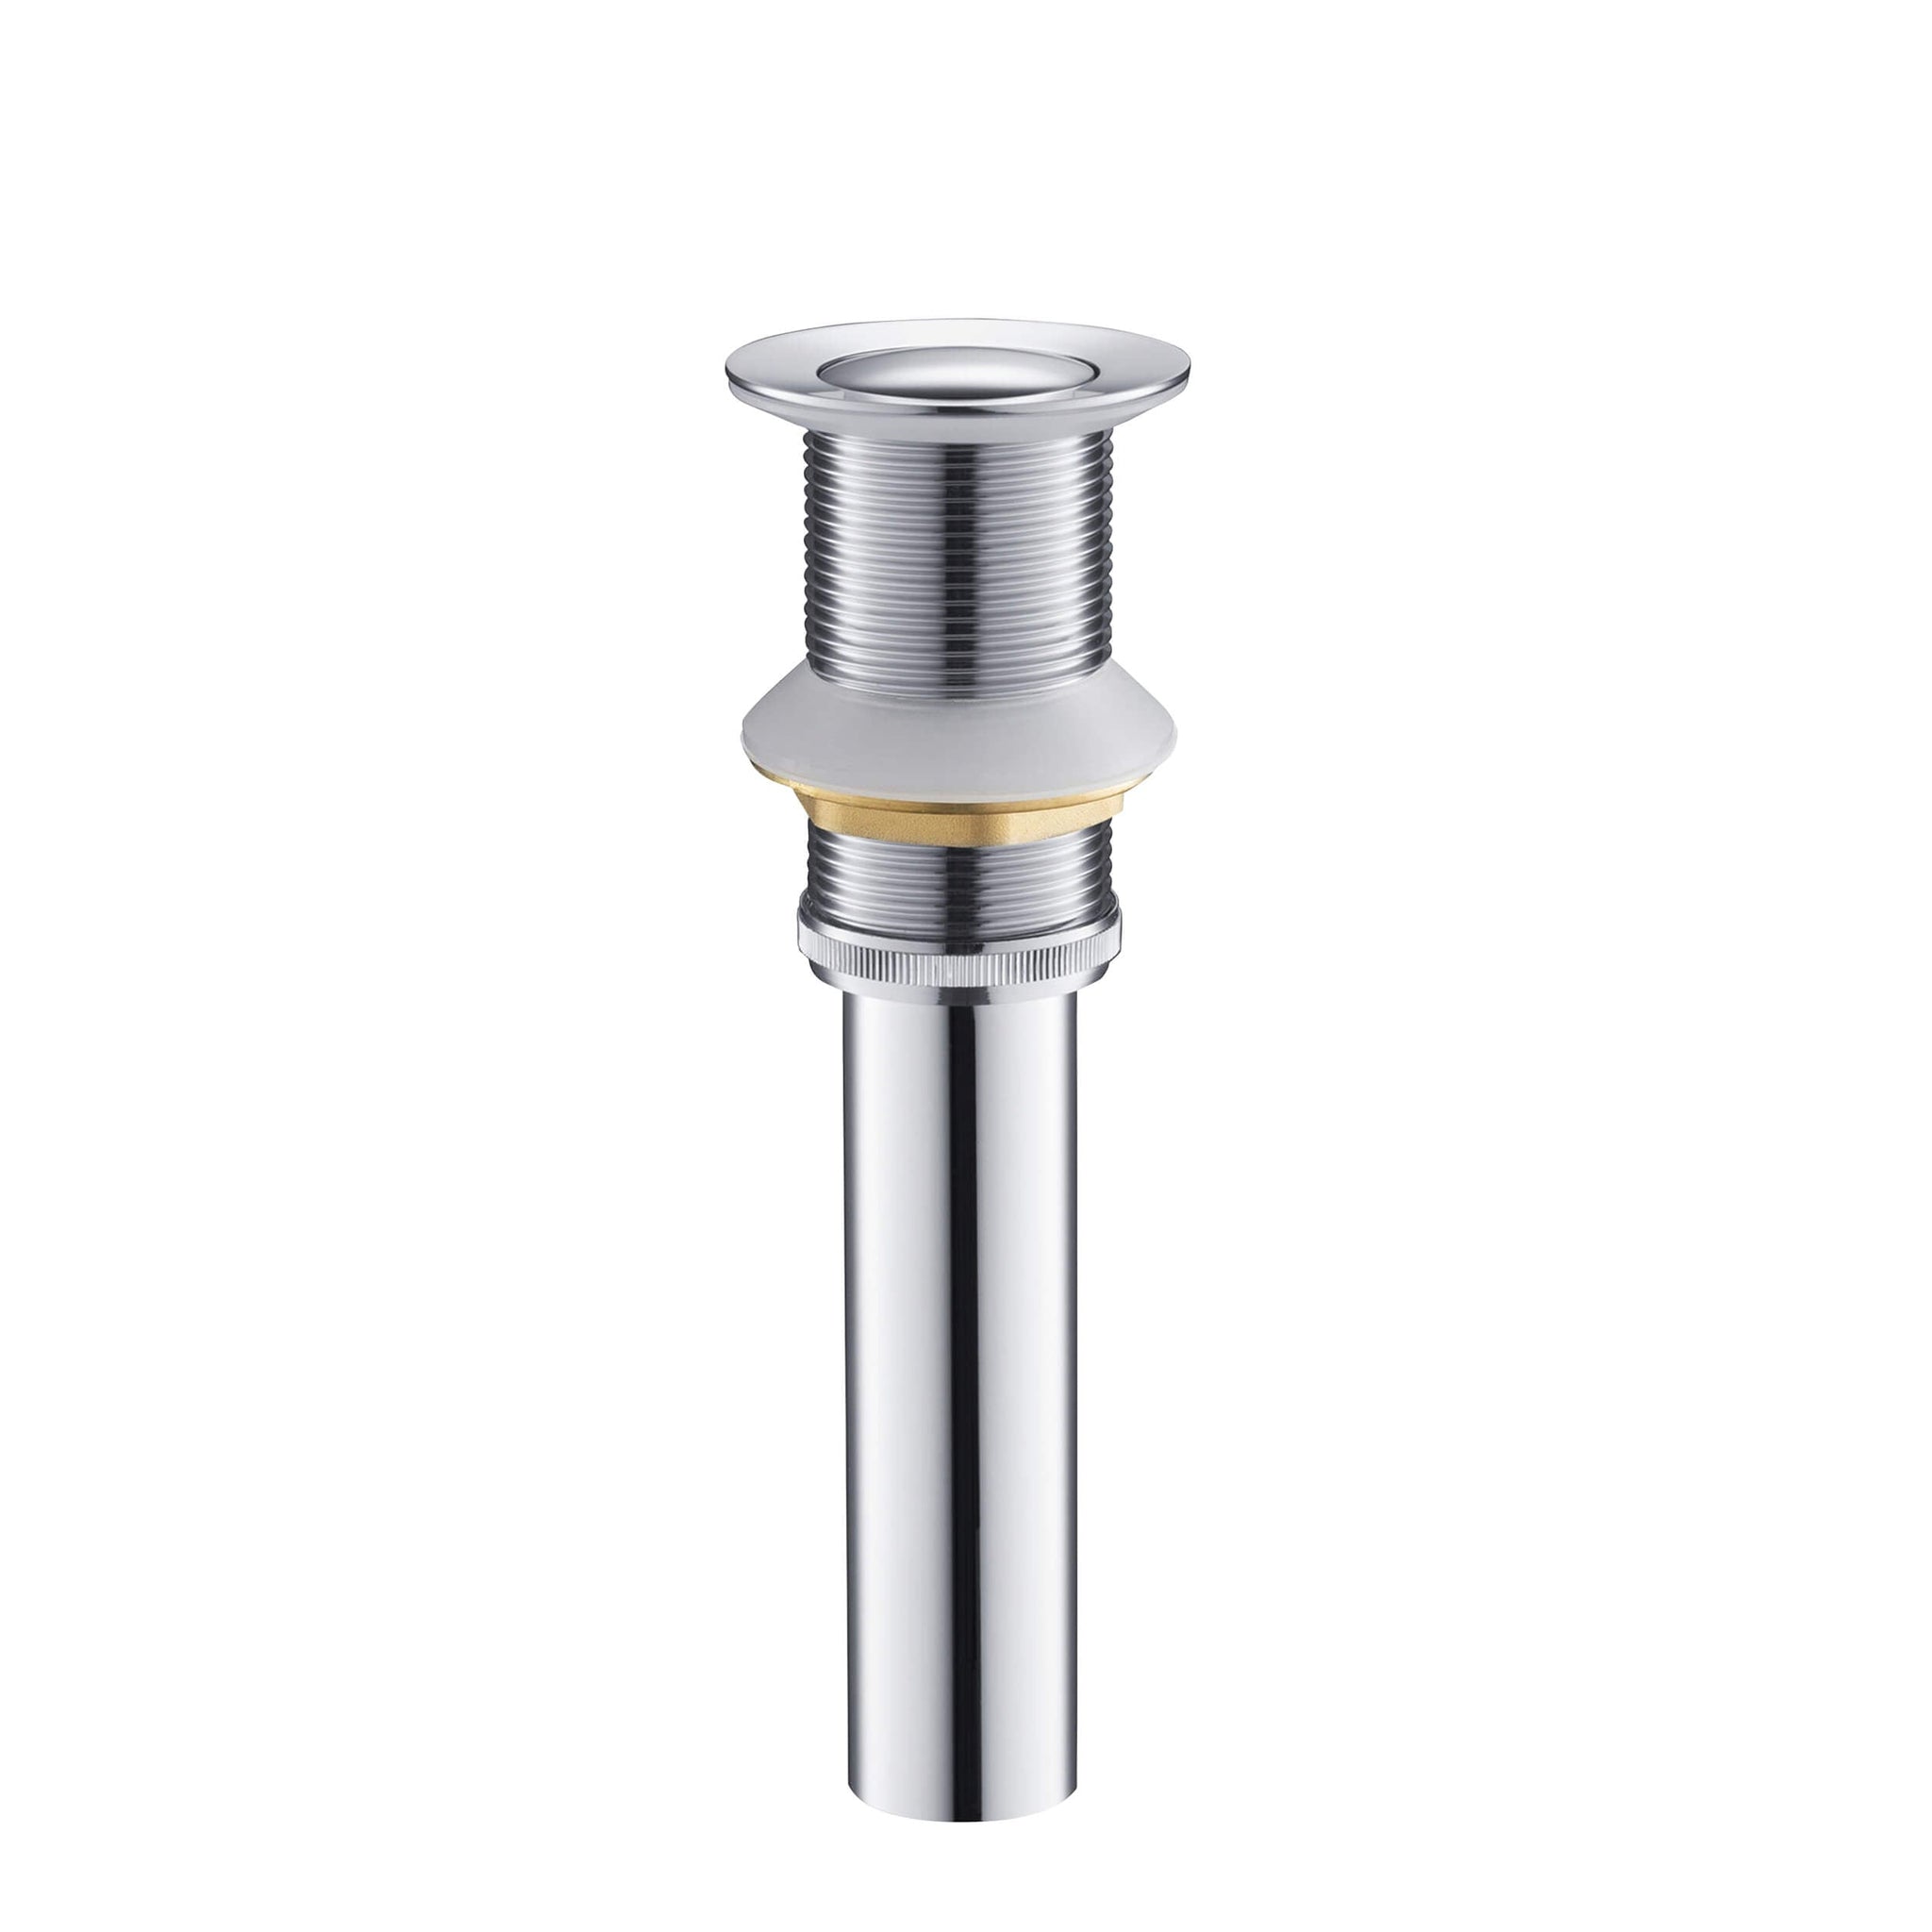 KIBI, KIBI Brass Bathroom Vessel Sink Pop-Up Drain Stopper Small Cover Without Overflow in Chrome Finish